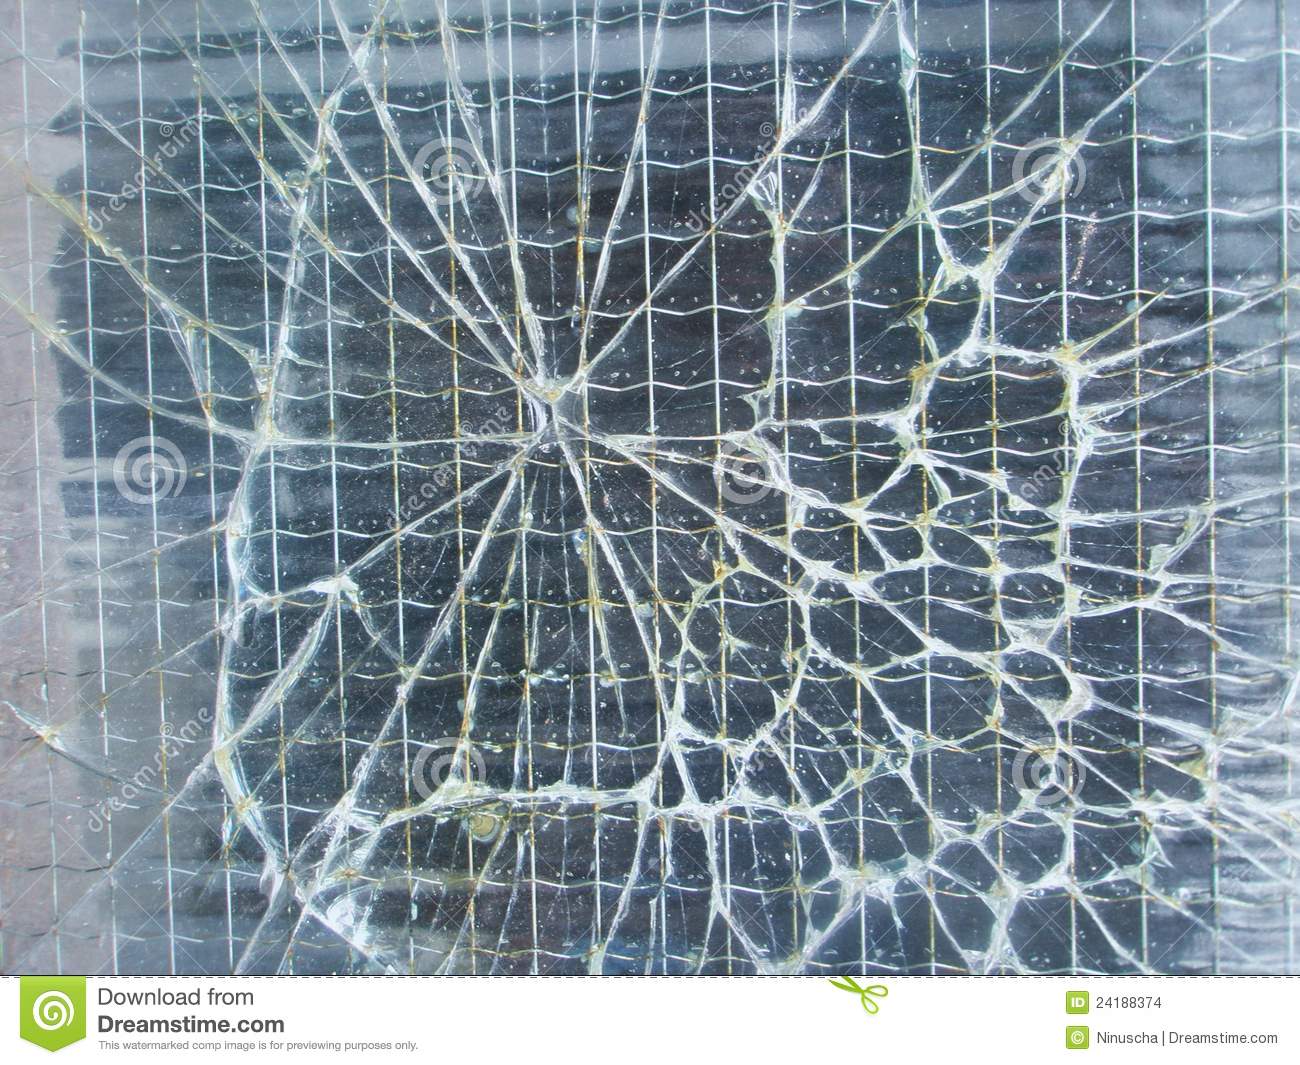 Broken Safety Wire Glass Background Stock Images   Image  24188374